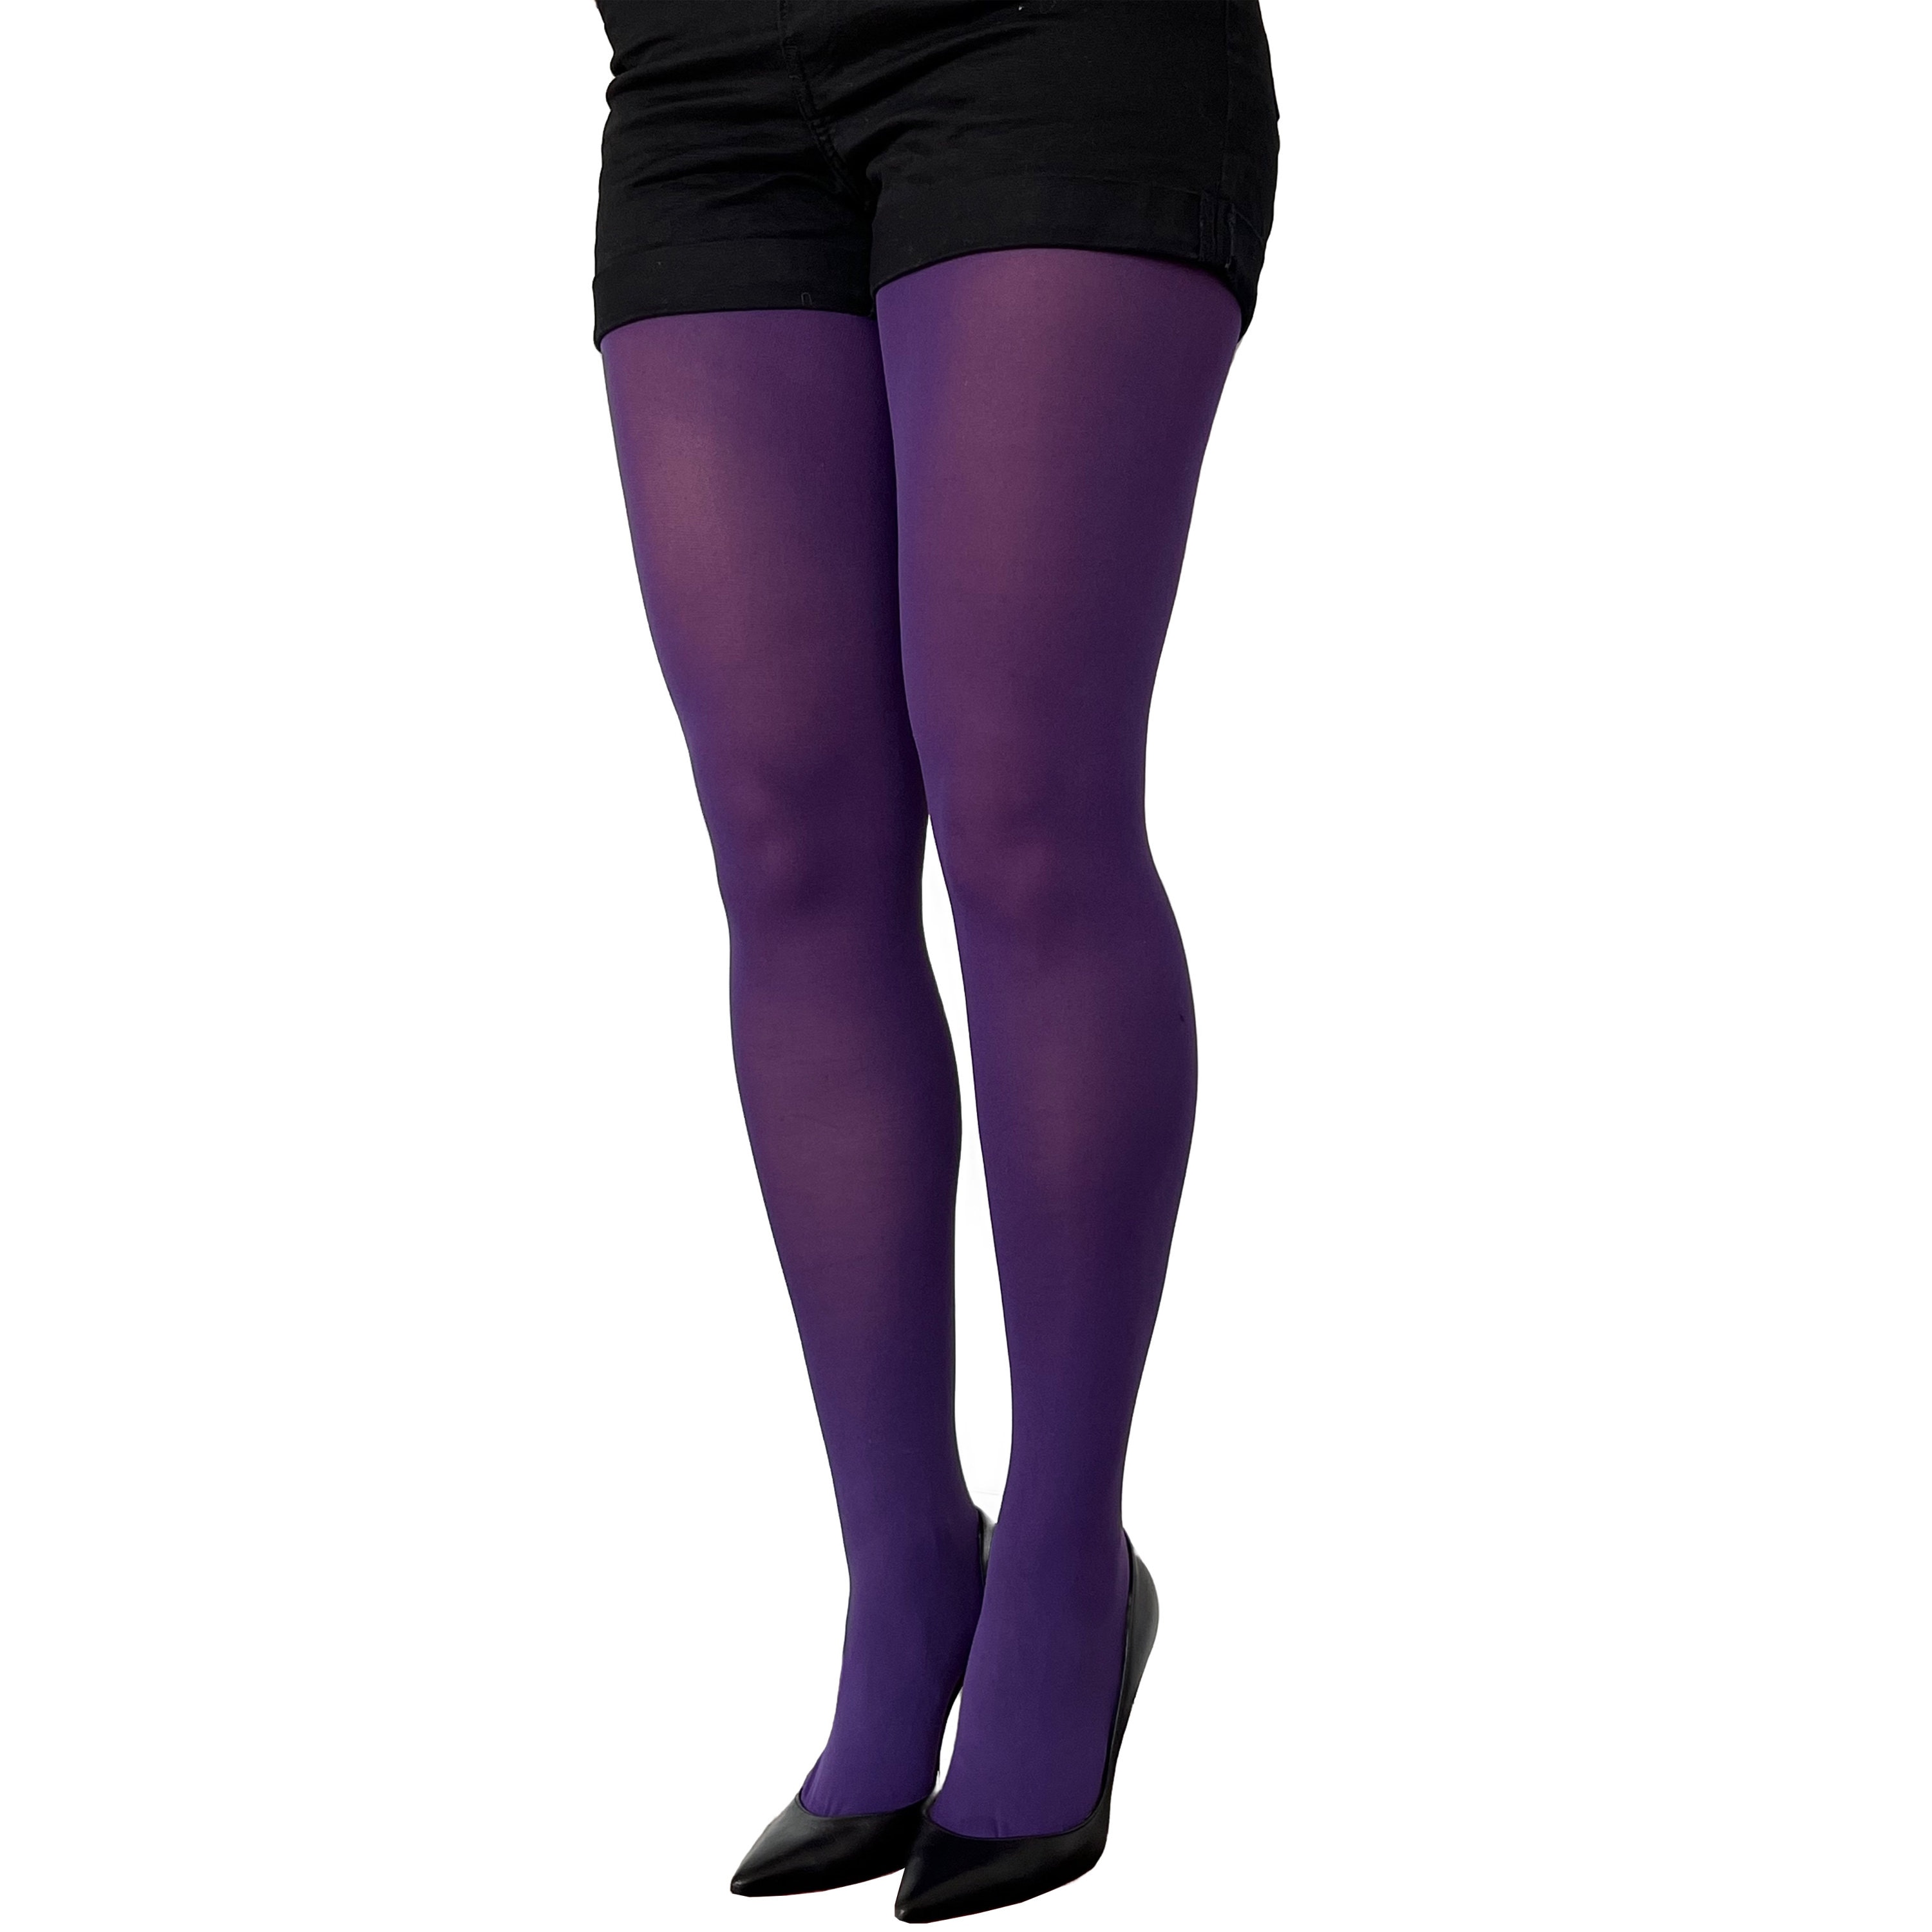 Purple Tights for Women Soft and Durable Opaque Pantyhose Tights Available  in Plus Size -  Canada